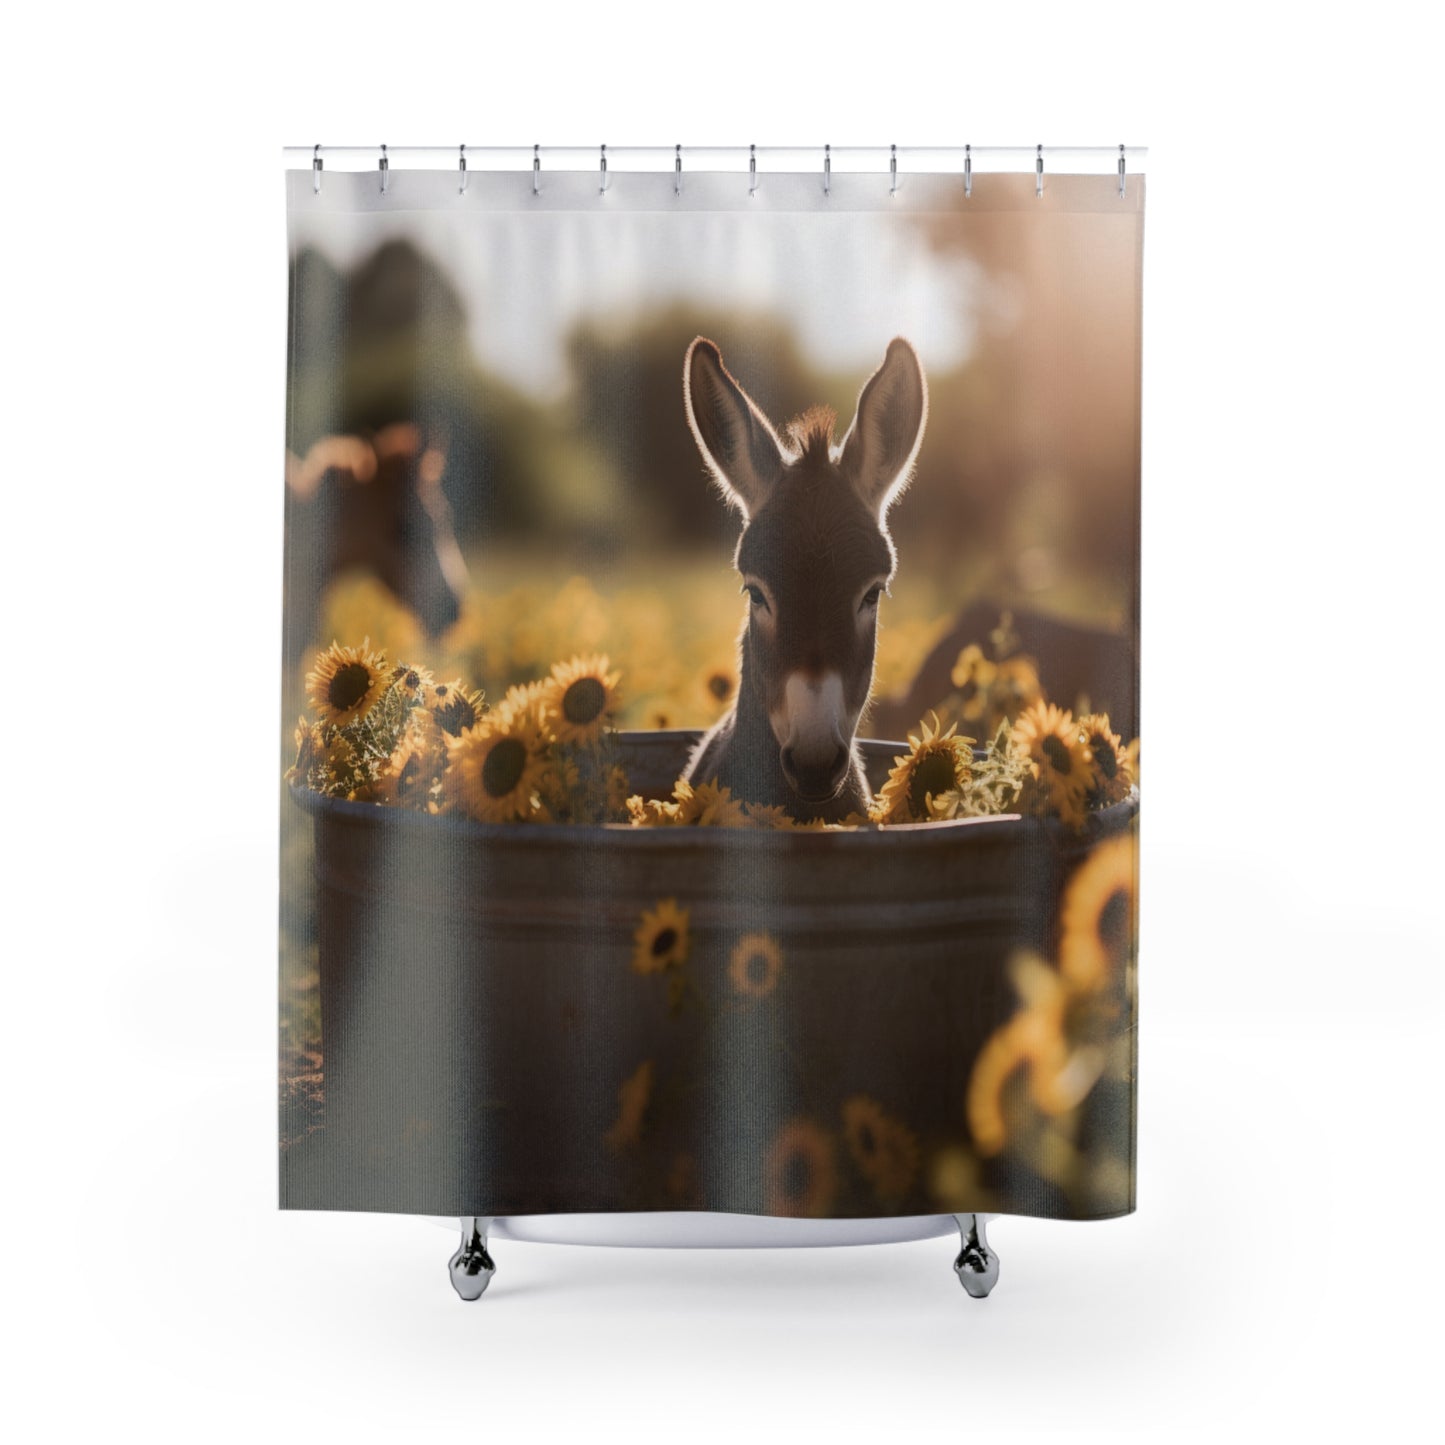 Baby Donkey in Tub with Sunflowers Shower Curtain